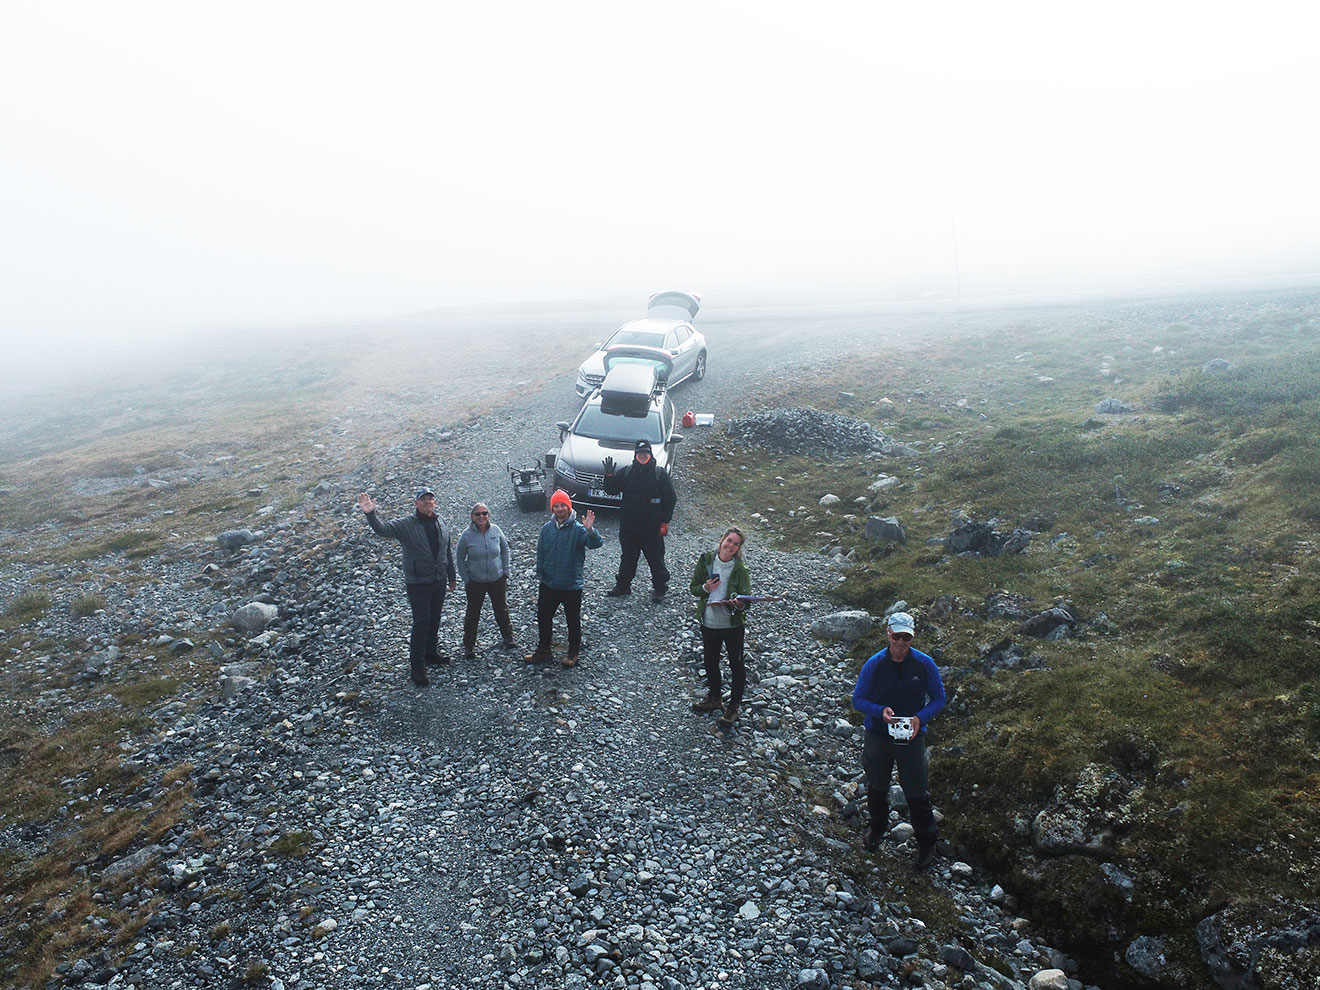 Taken from above, this image shows six people staring up at the camera and waving. Two cars with open trunks sit behind the people, who are standing on a rocky paved road with fog behind them.